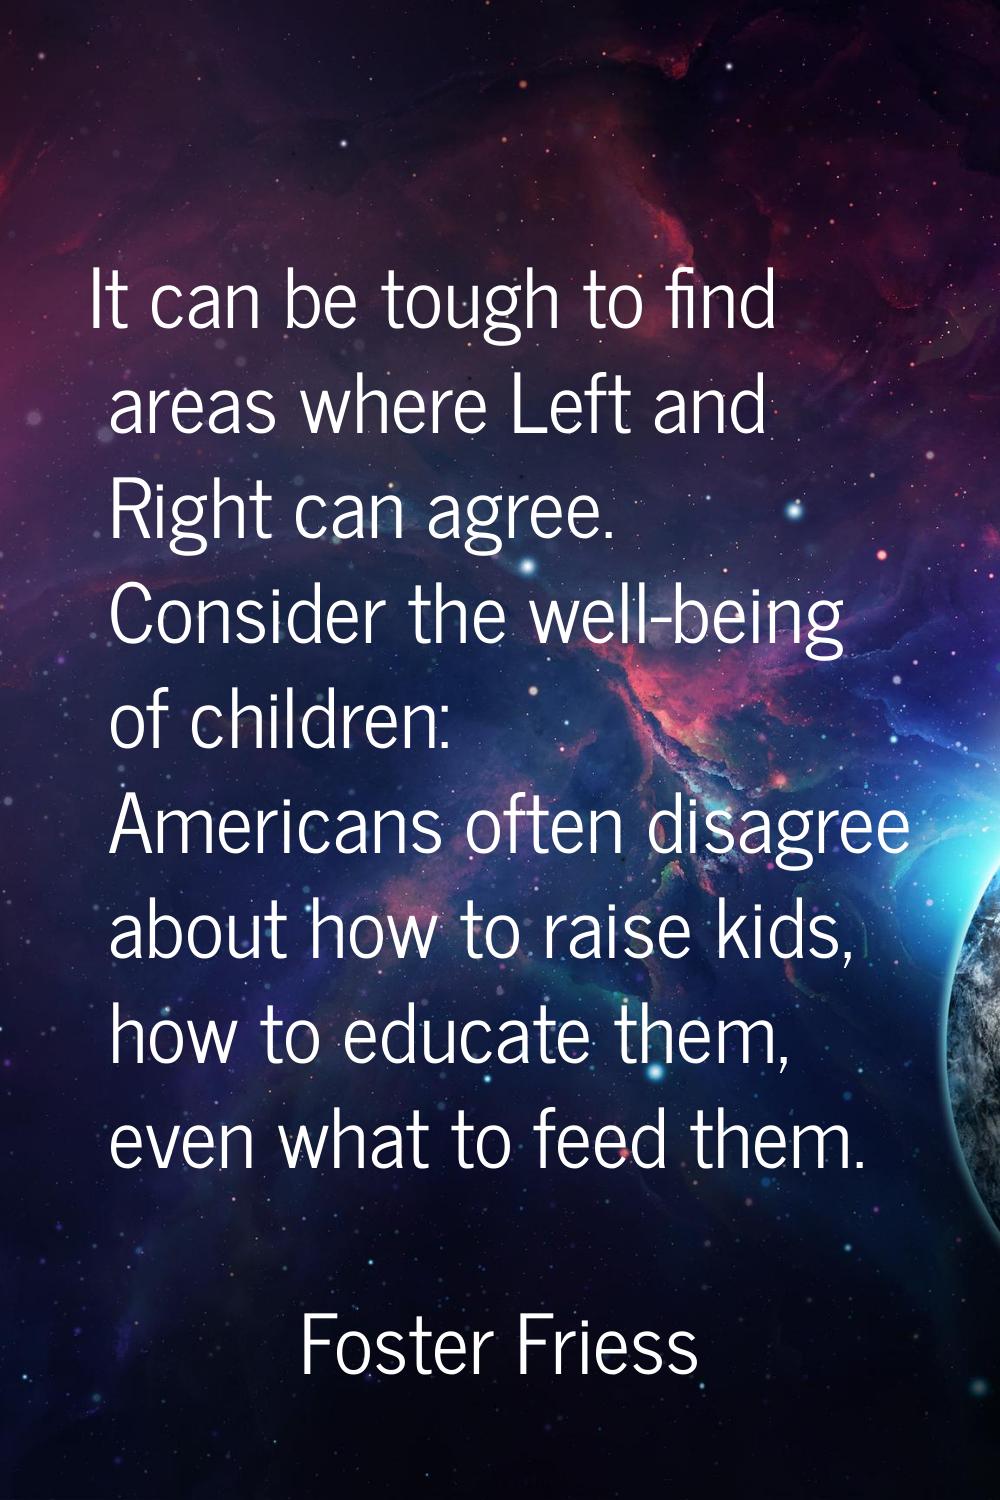 It can be tough to find areas where Left and Right can agree. Consider the well-being of children: 